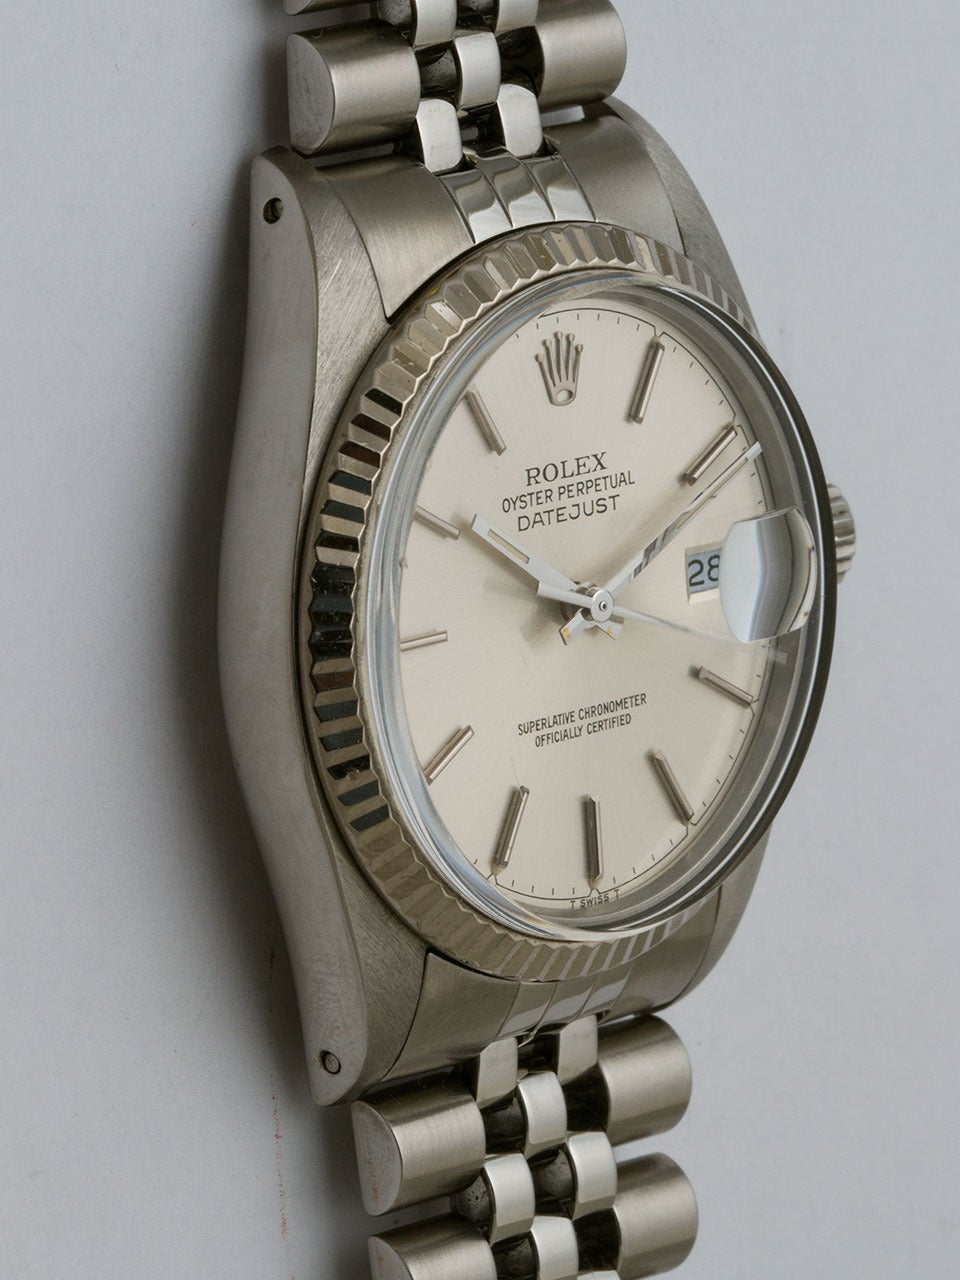 Rolex Stainless Steel Datejust ref# 16014 serial# 8.9 million circa 1985. 36mm diameter case with 18K white gold fluted bezel and acrylic crystal. Original silvered satin dial with applied silver indexes and silver baton hands. Powered by self